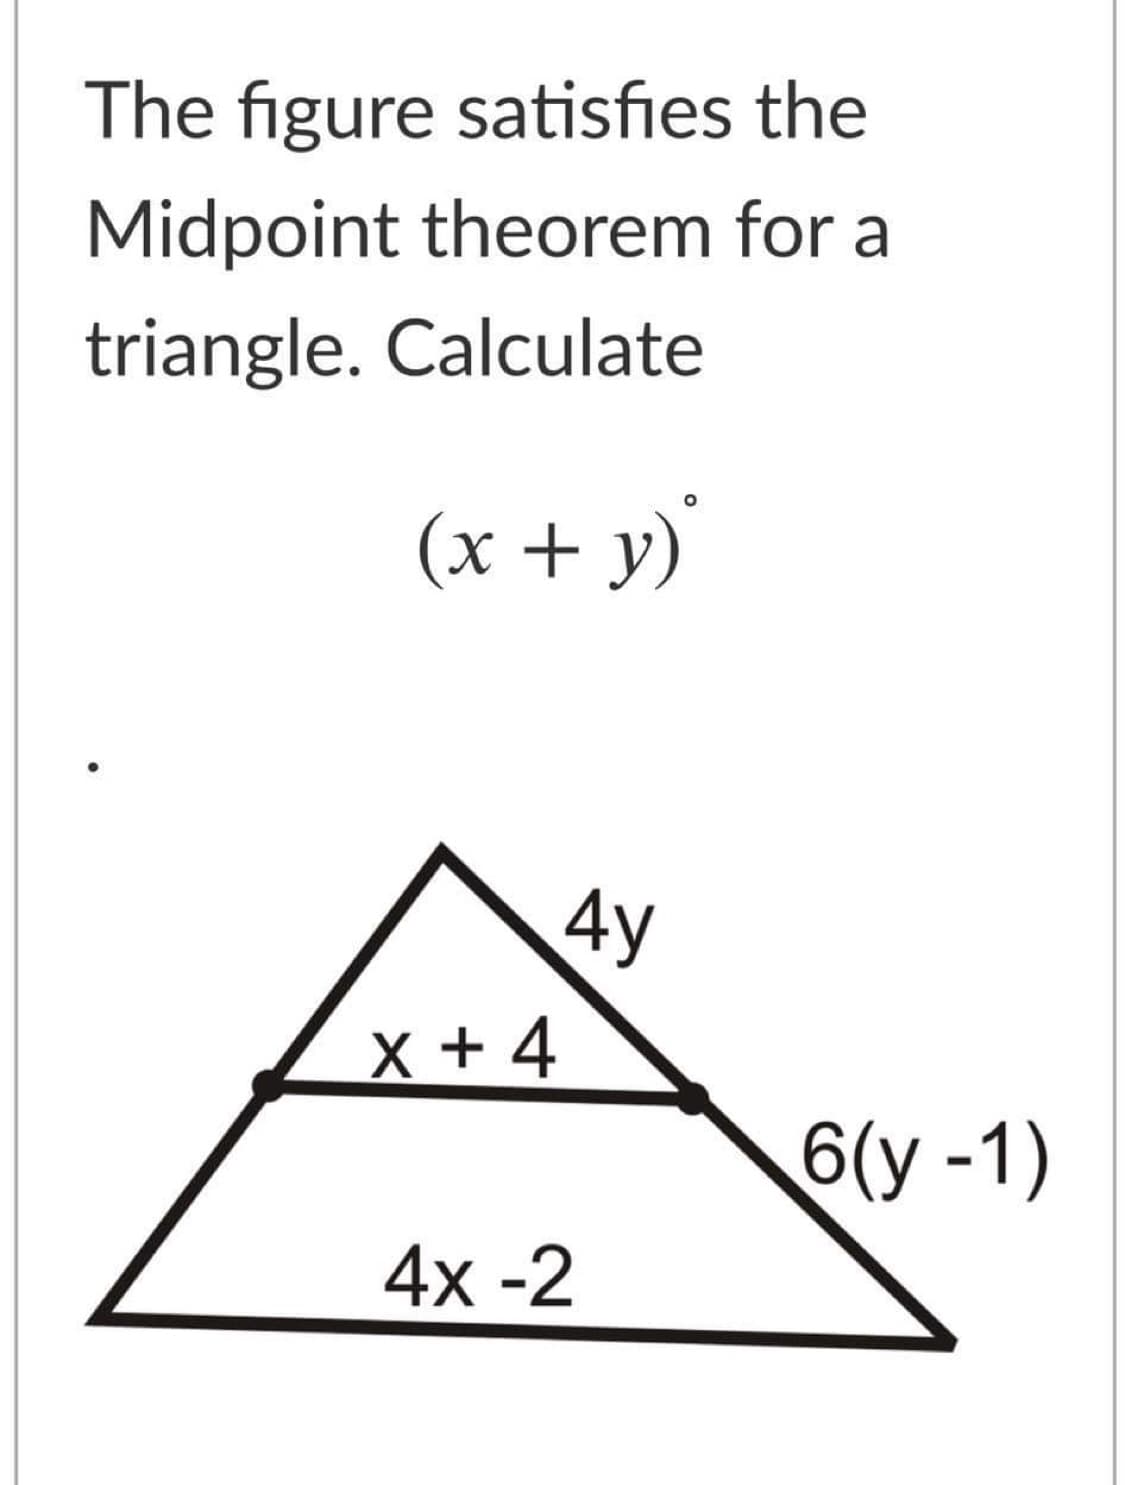 The figure satisfies the
Midpoint theorem for a
triangle. Calculate
(x + y)
4у
X + 4
6(у -1)
4x -2
